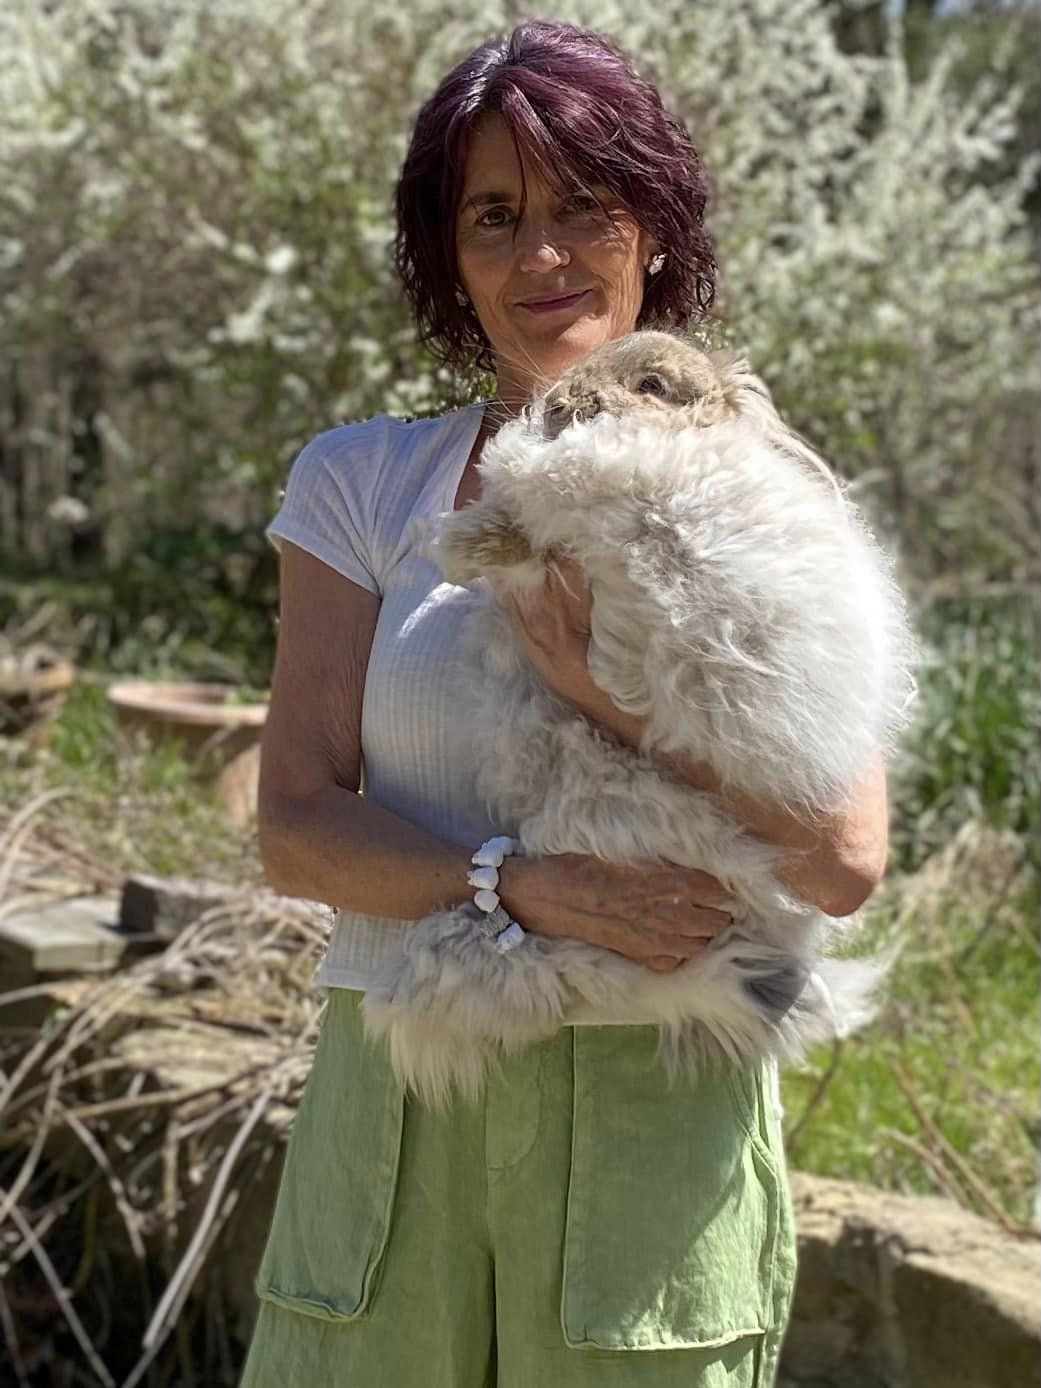 Lisa Moretti of Athens Angoras will present about her Angora rabbits and their fiber.